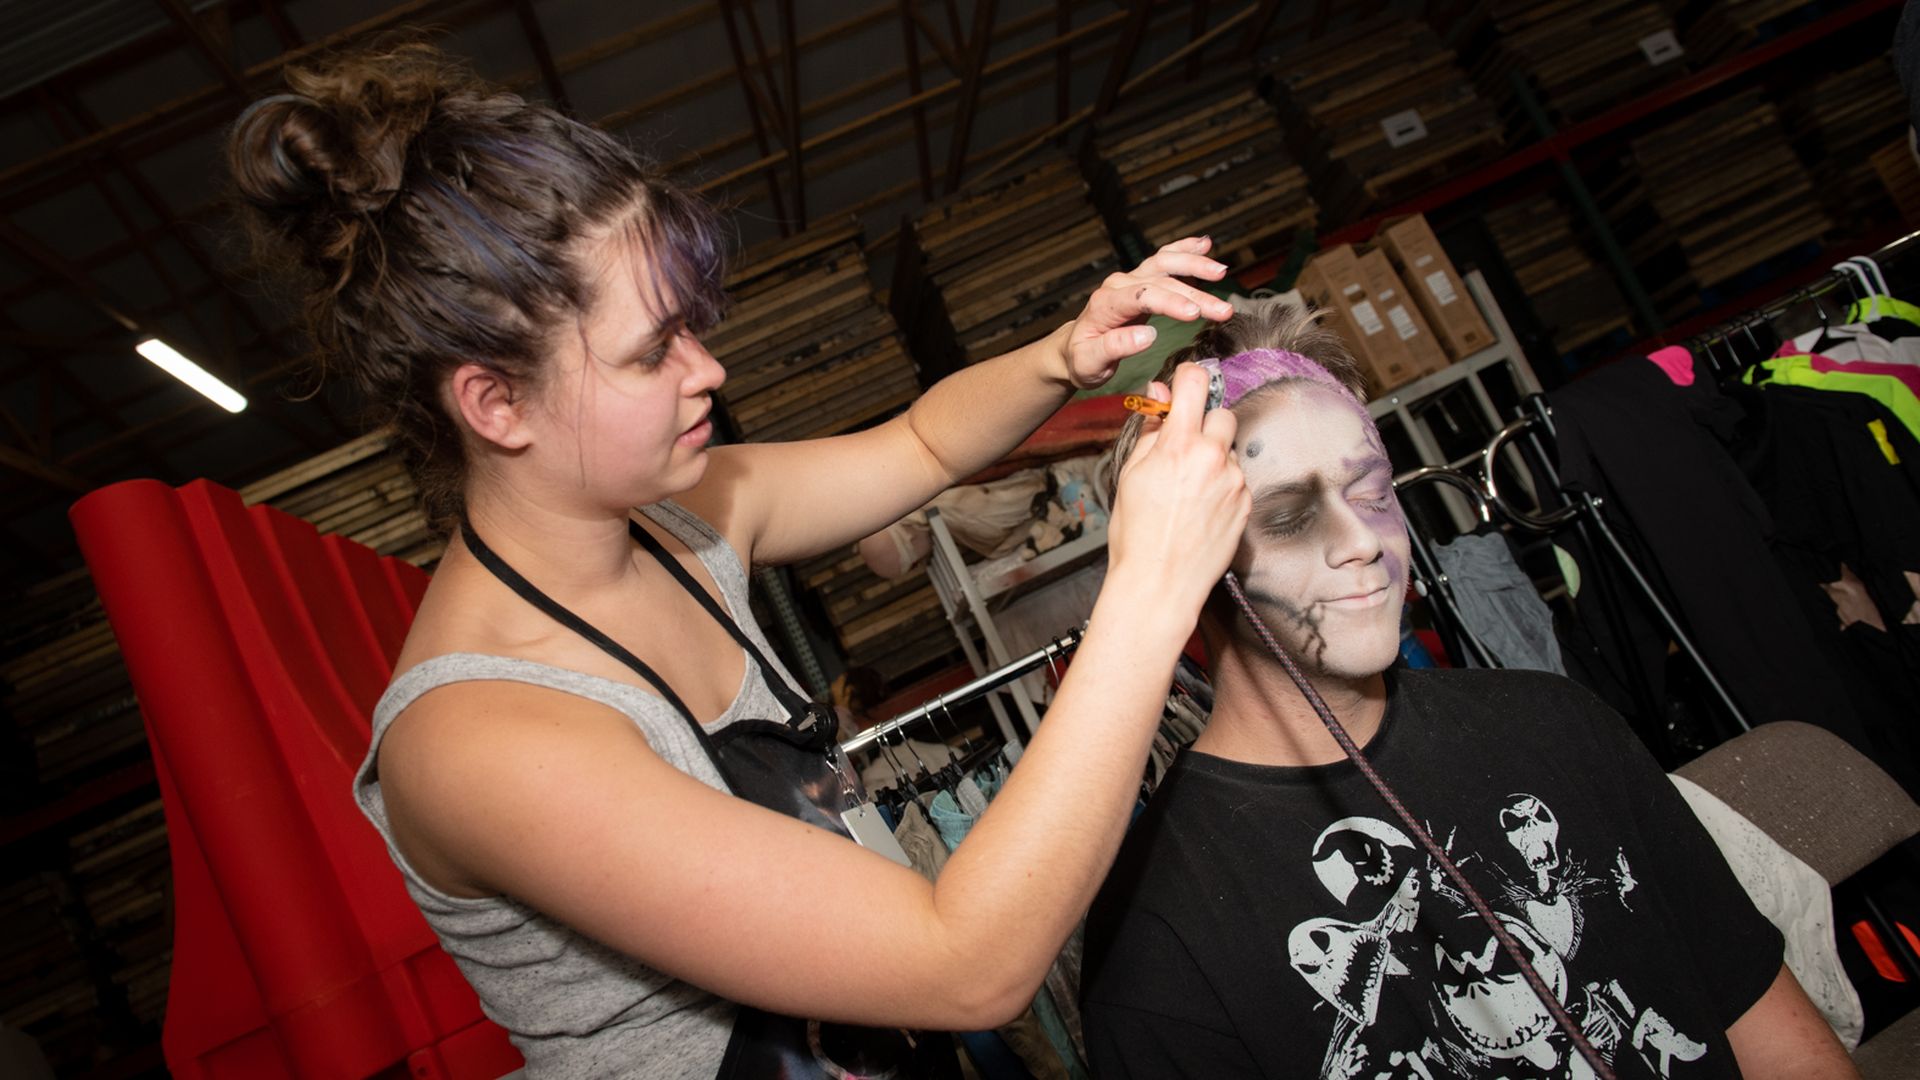 Cianna Gaston applies airbrush zombie makeup to a person's face